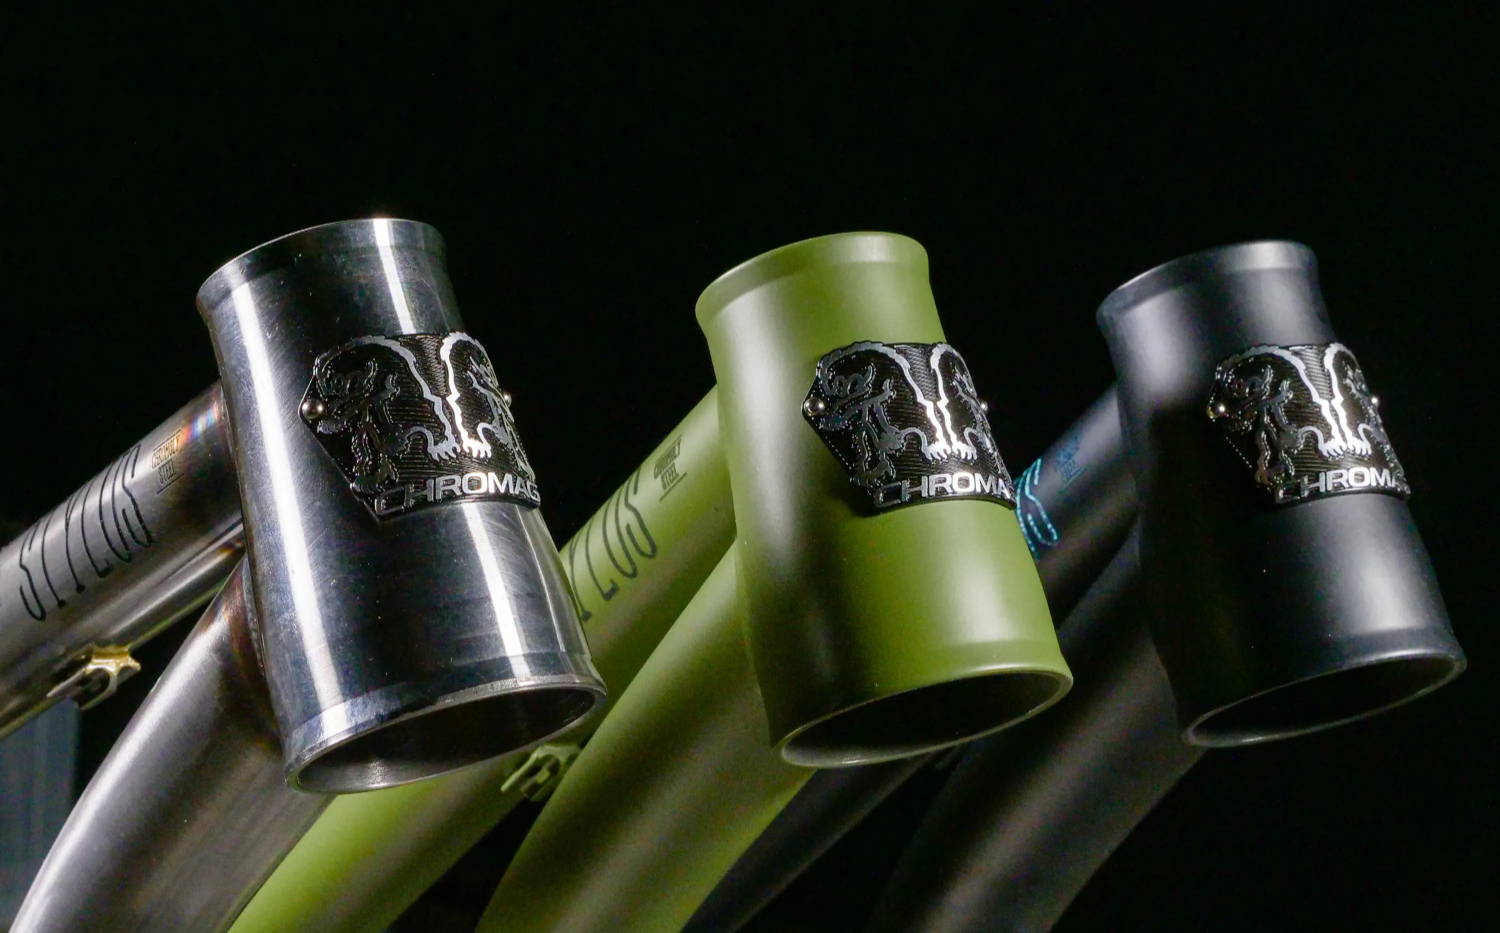 Detail of Chromag Stylus headtubes in Raw, Rover Olive, and Dark Crystal Colorways